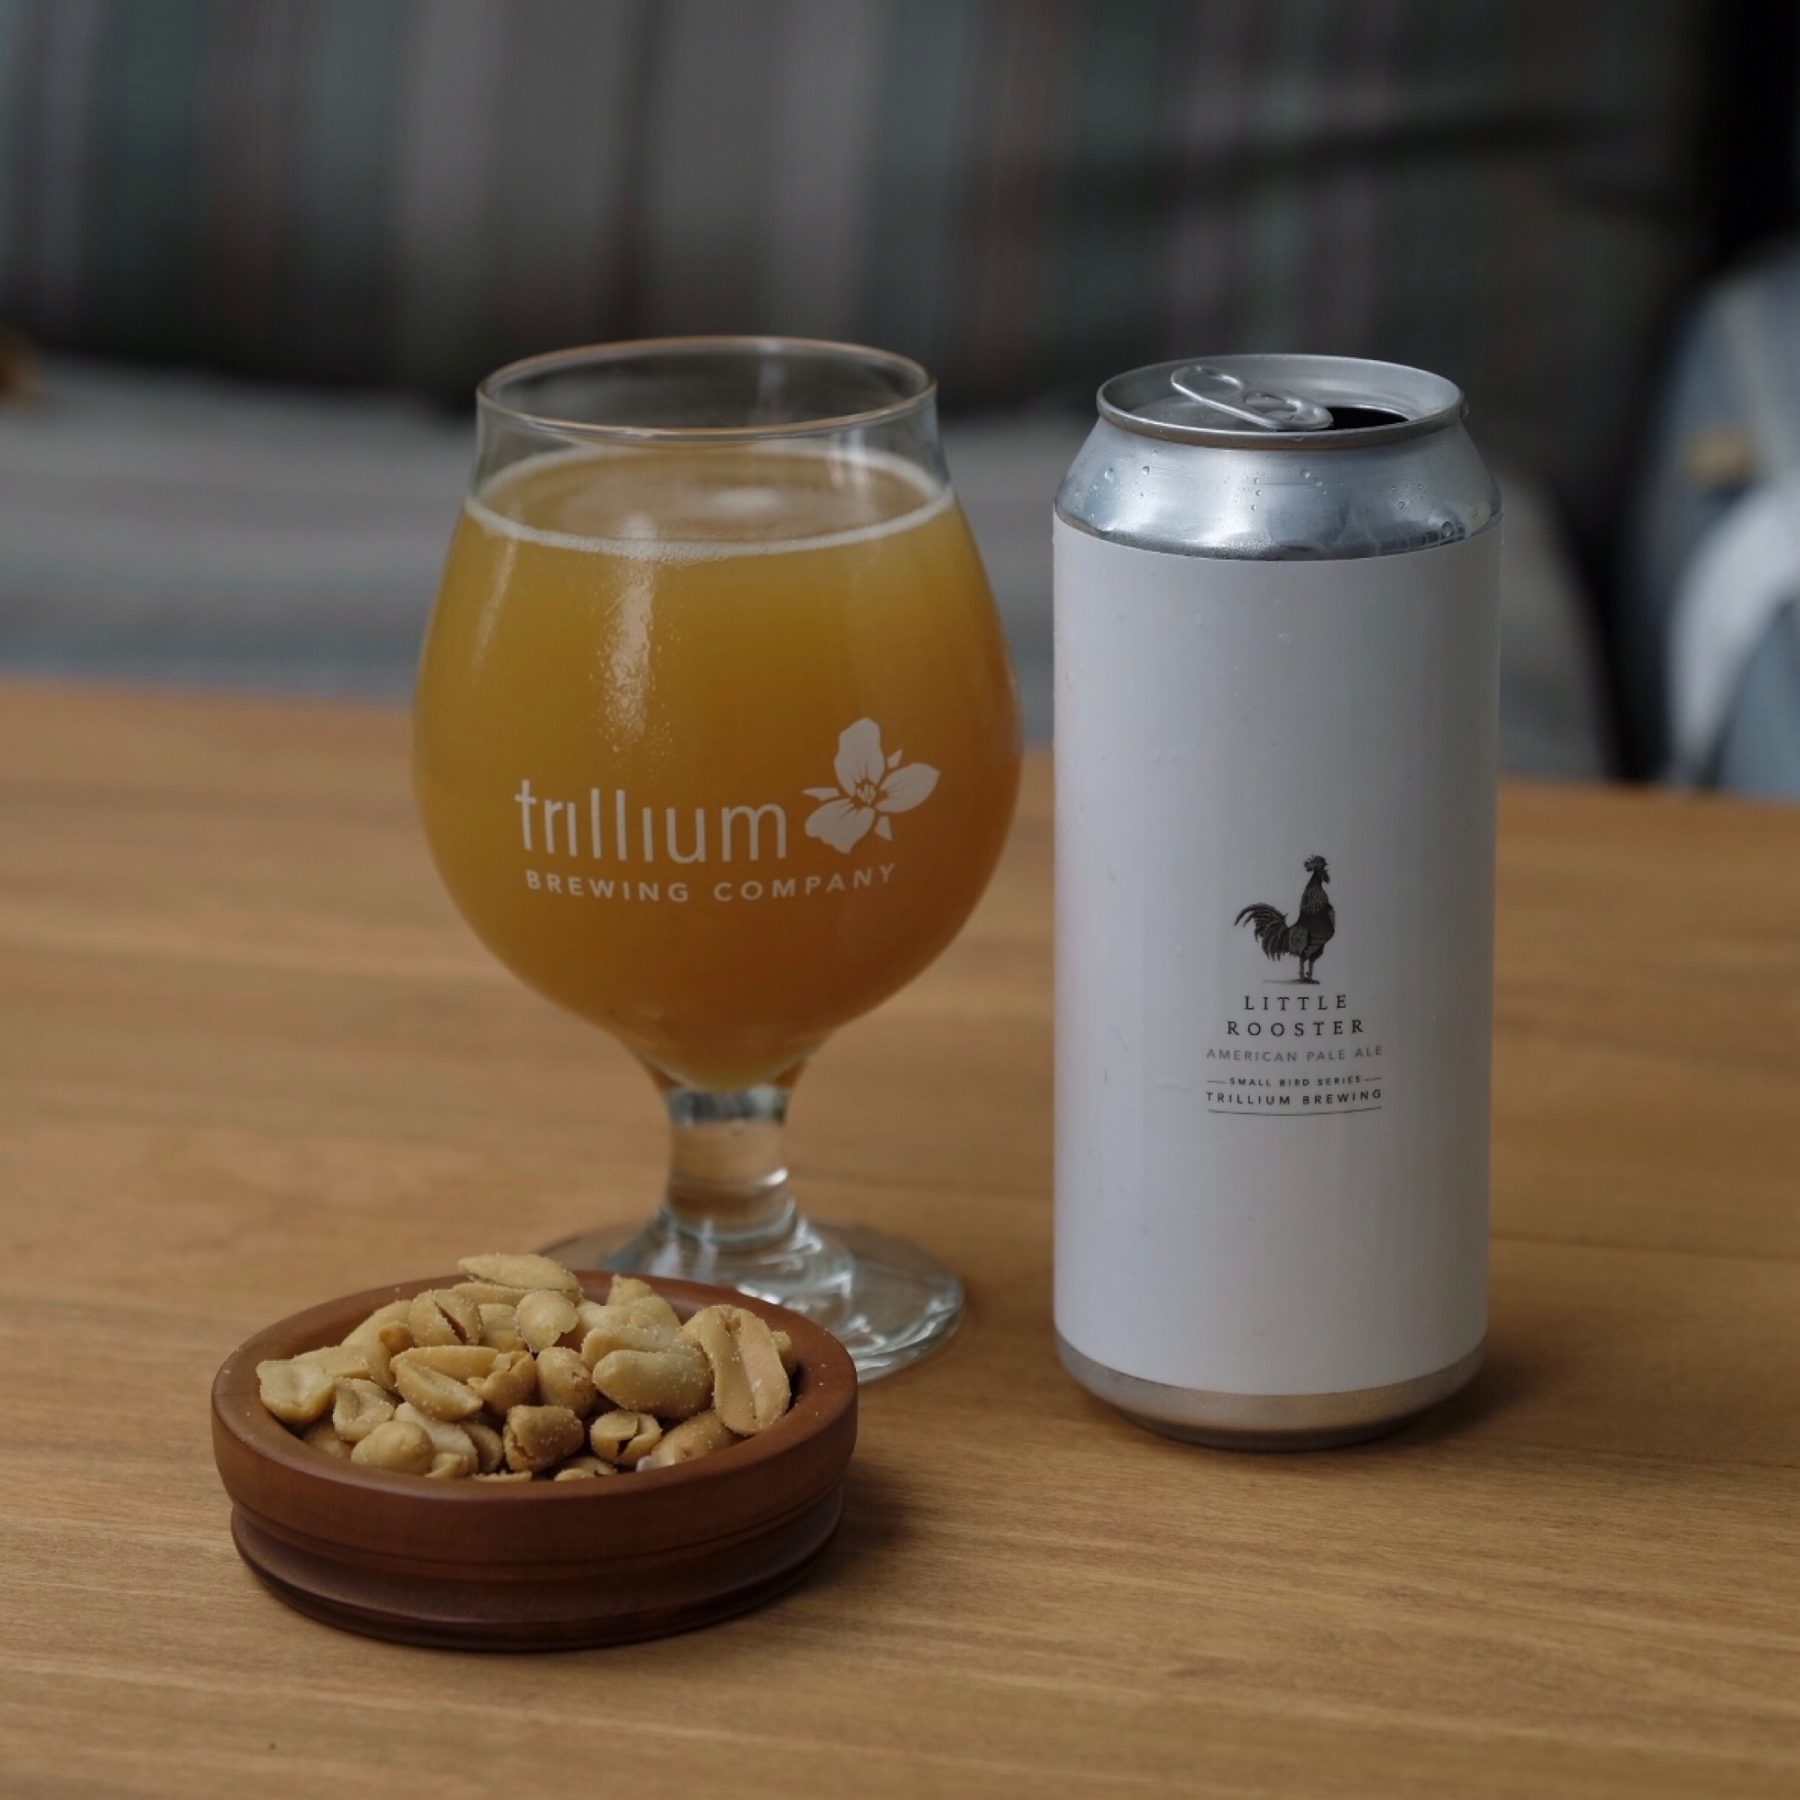 Trillium Brewing Company's Little Rooster